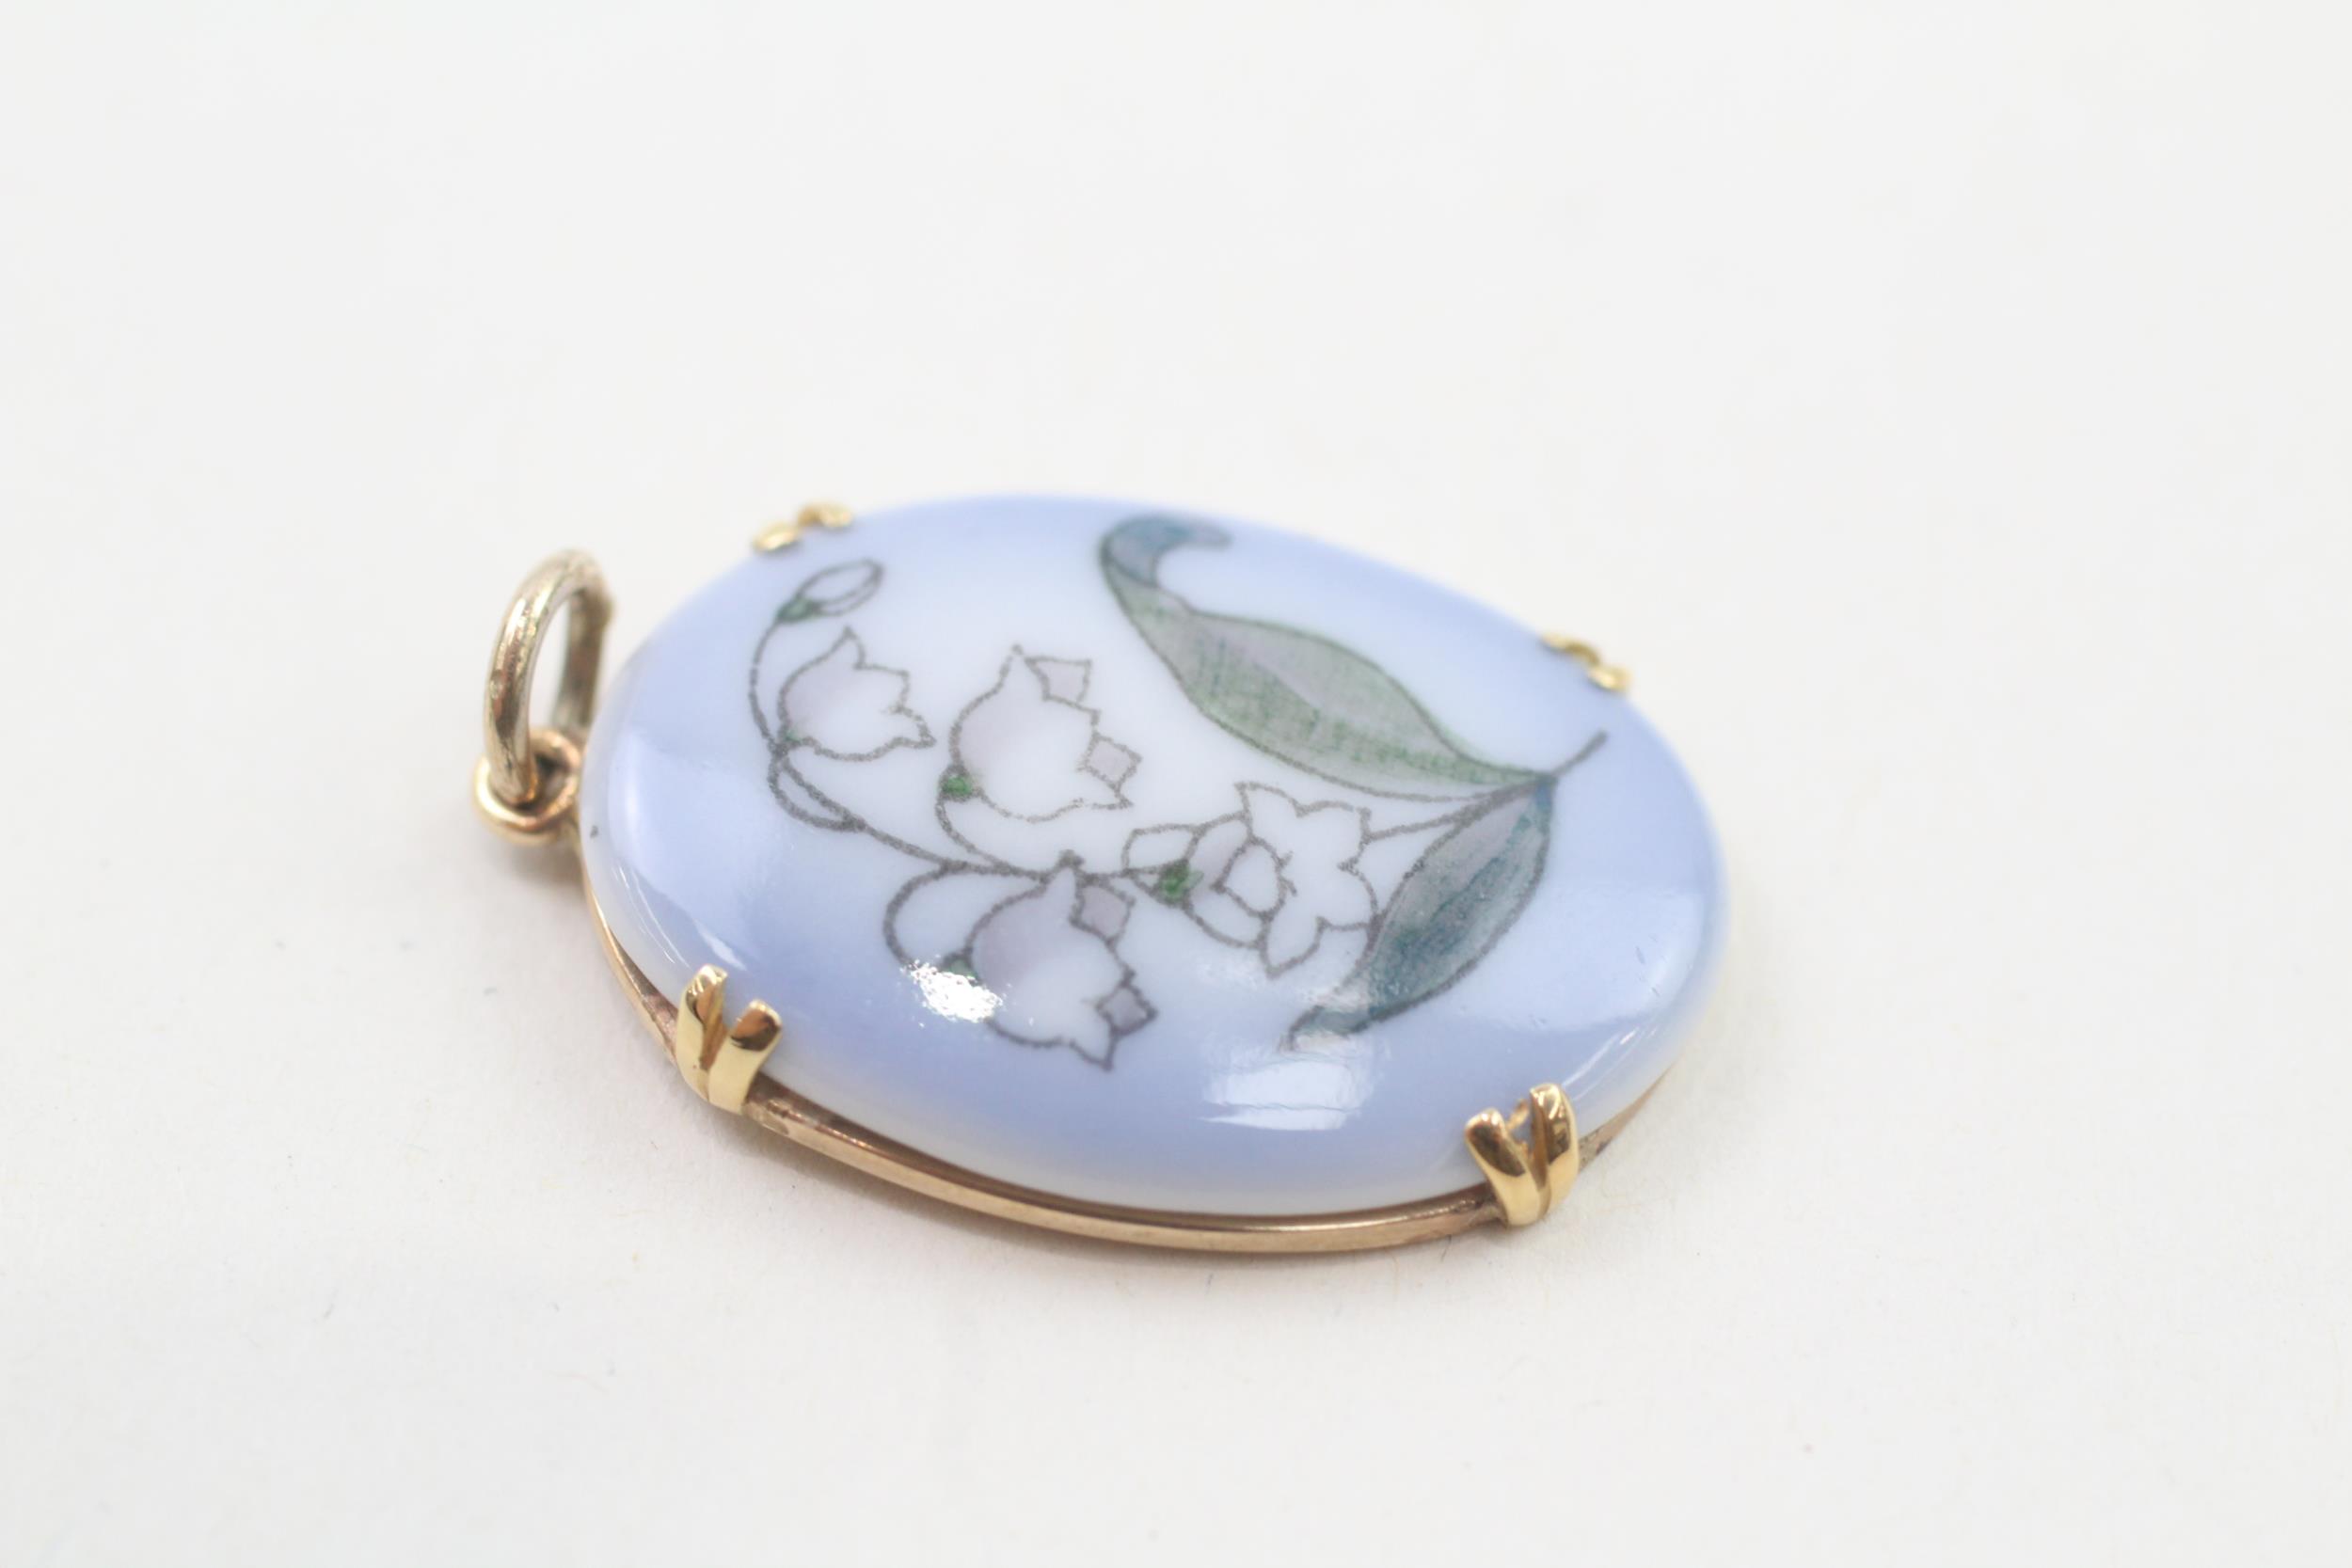 9ct gold lilly of the valley, danish porcelain pendant by Bing & Grondahl (3.2g) - Image 2 of 5